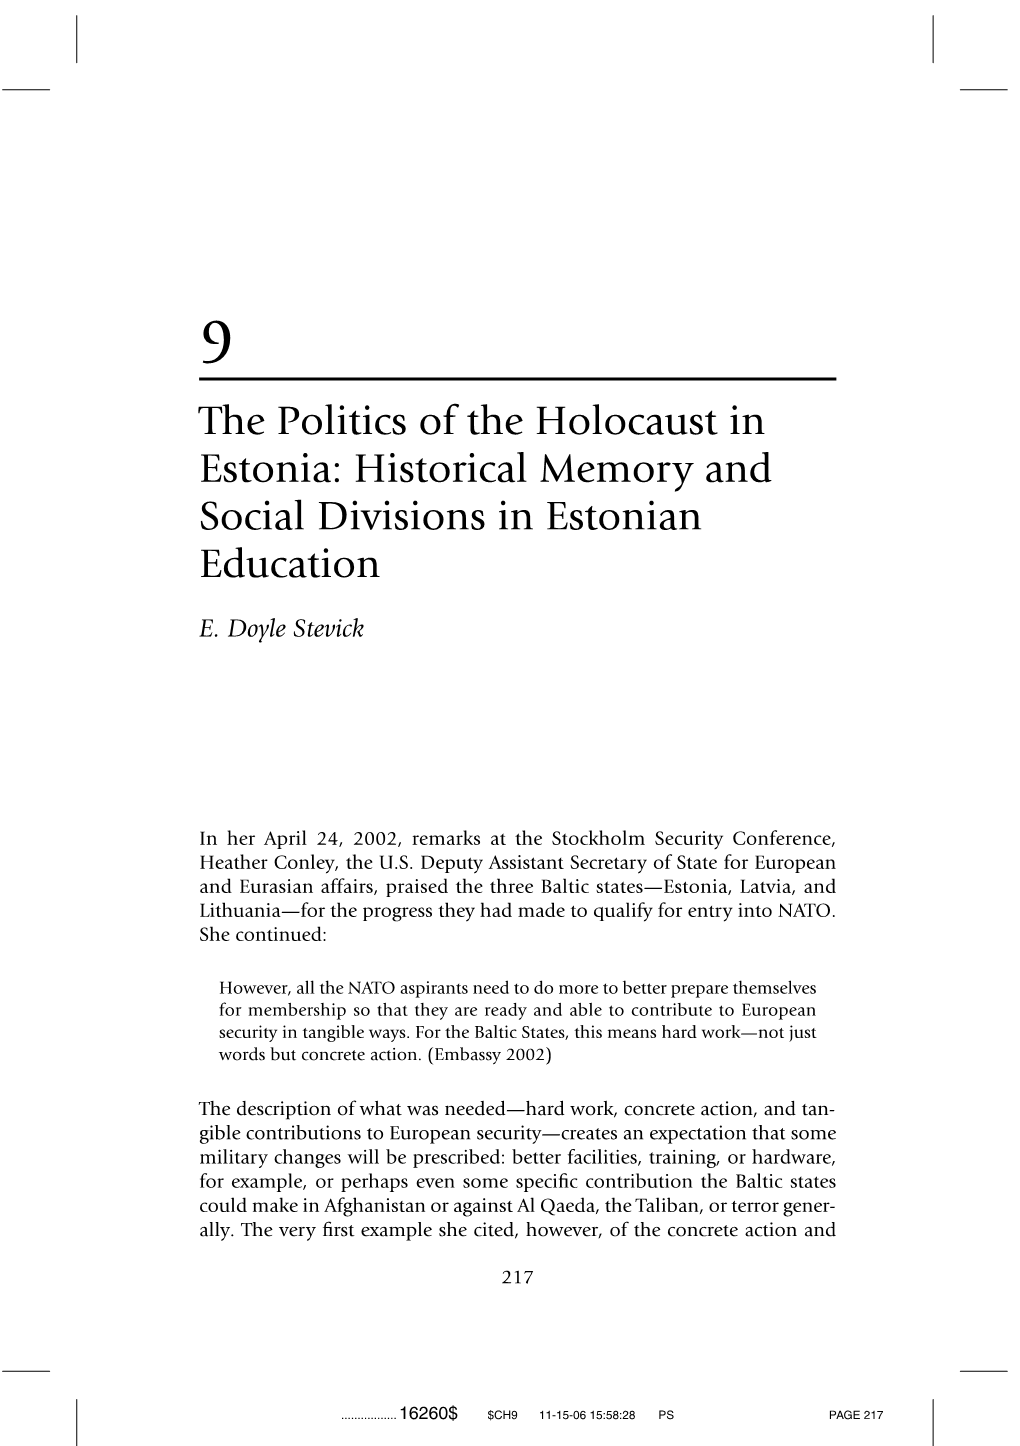 The Politics of the Holocaust in Estonia: Historical Memory and Social Divisions in Estonian Education